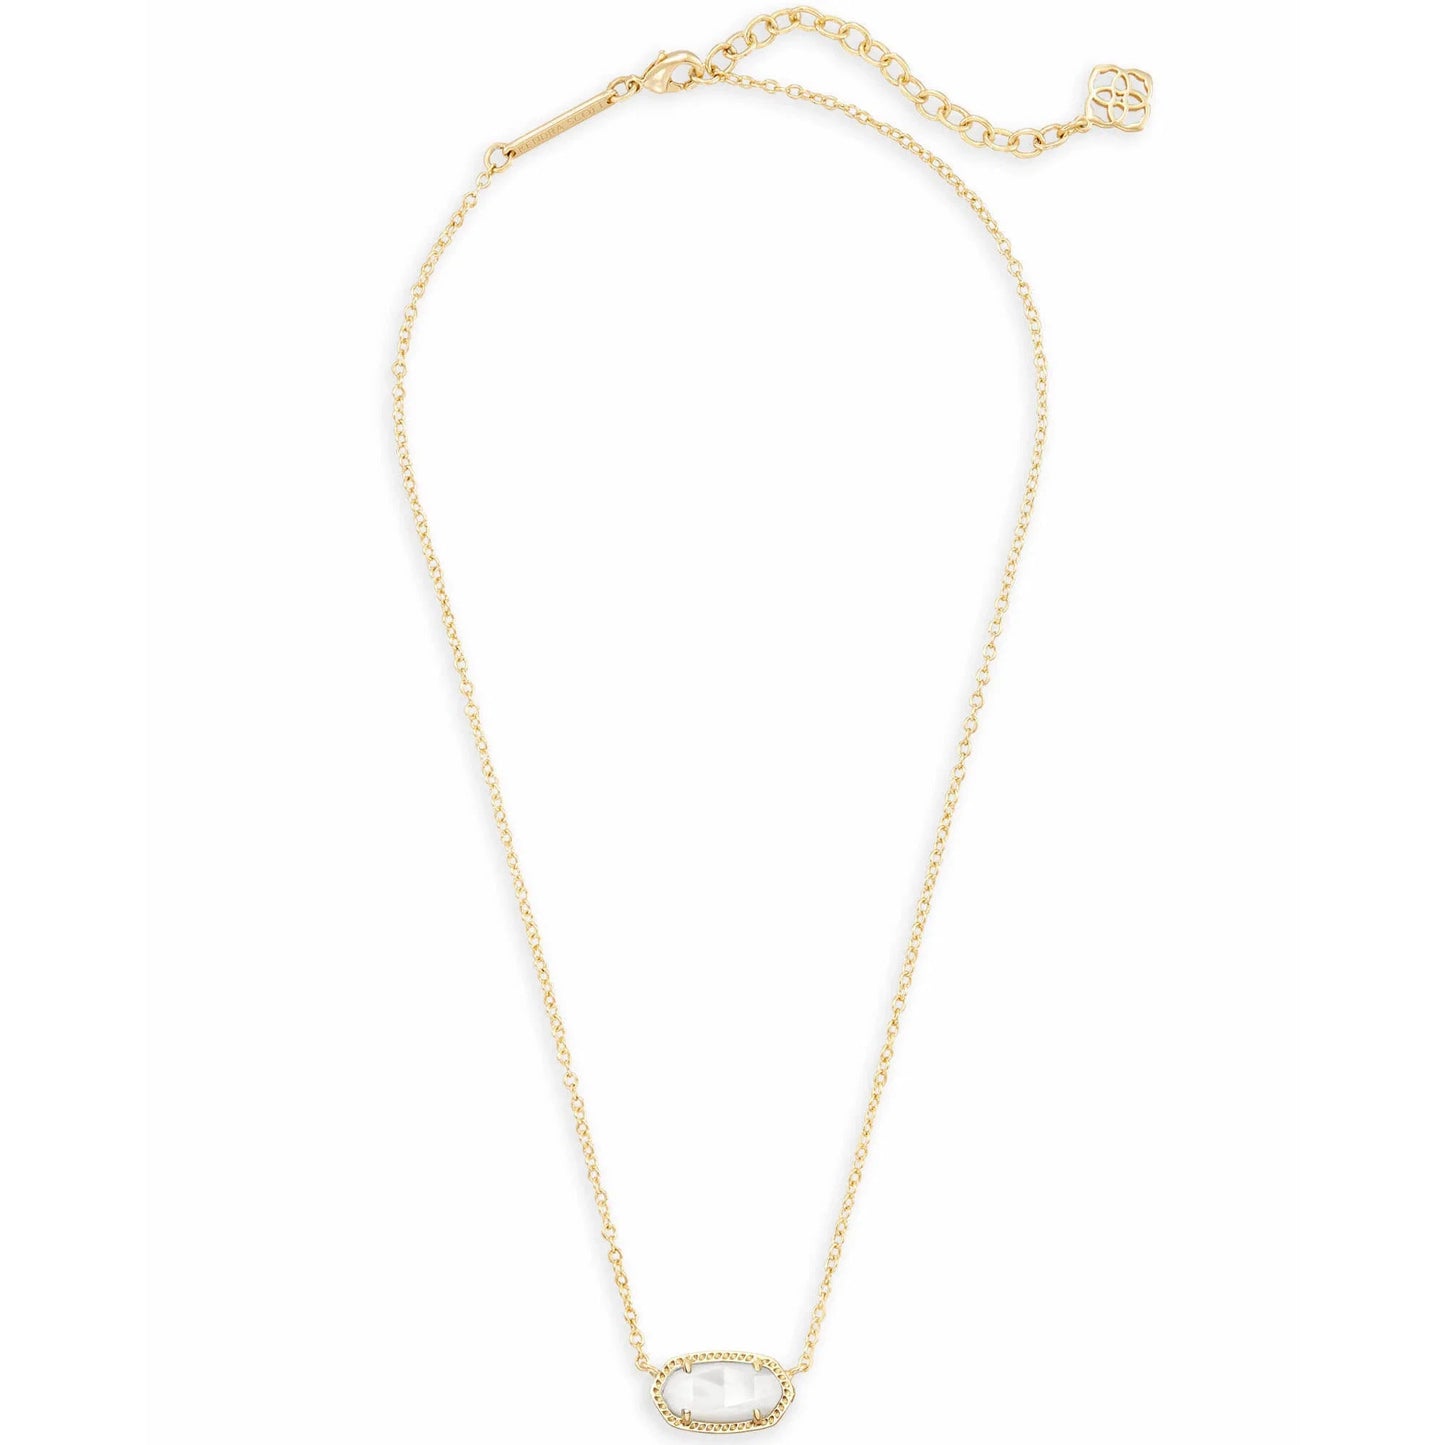 Kendra Scott Elisa Gold Pendant Necklace, Ivory Mother of Pearl